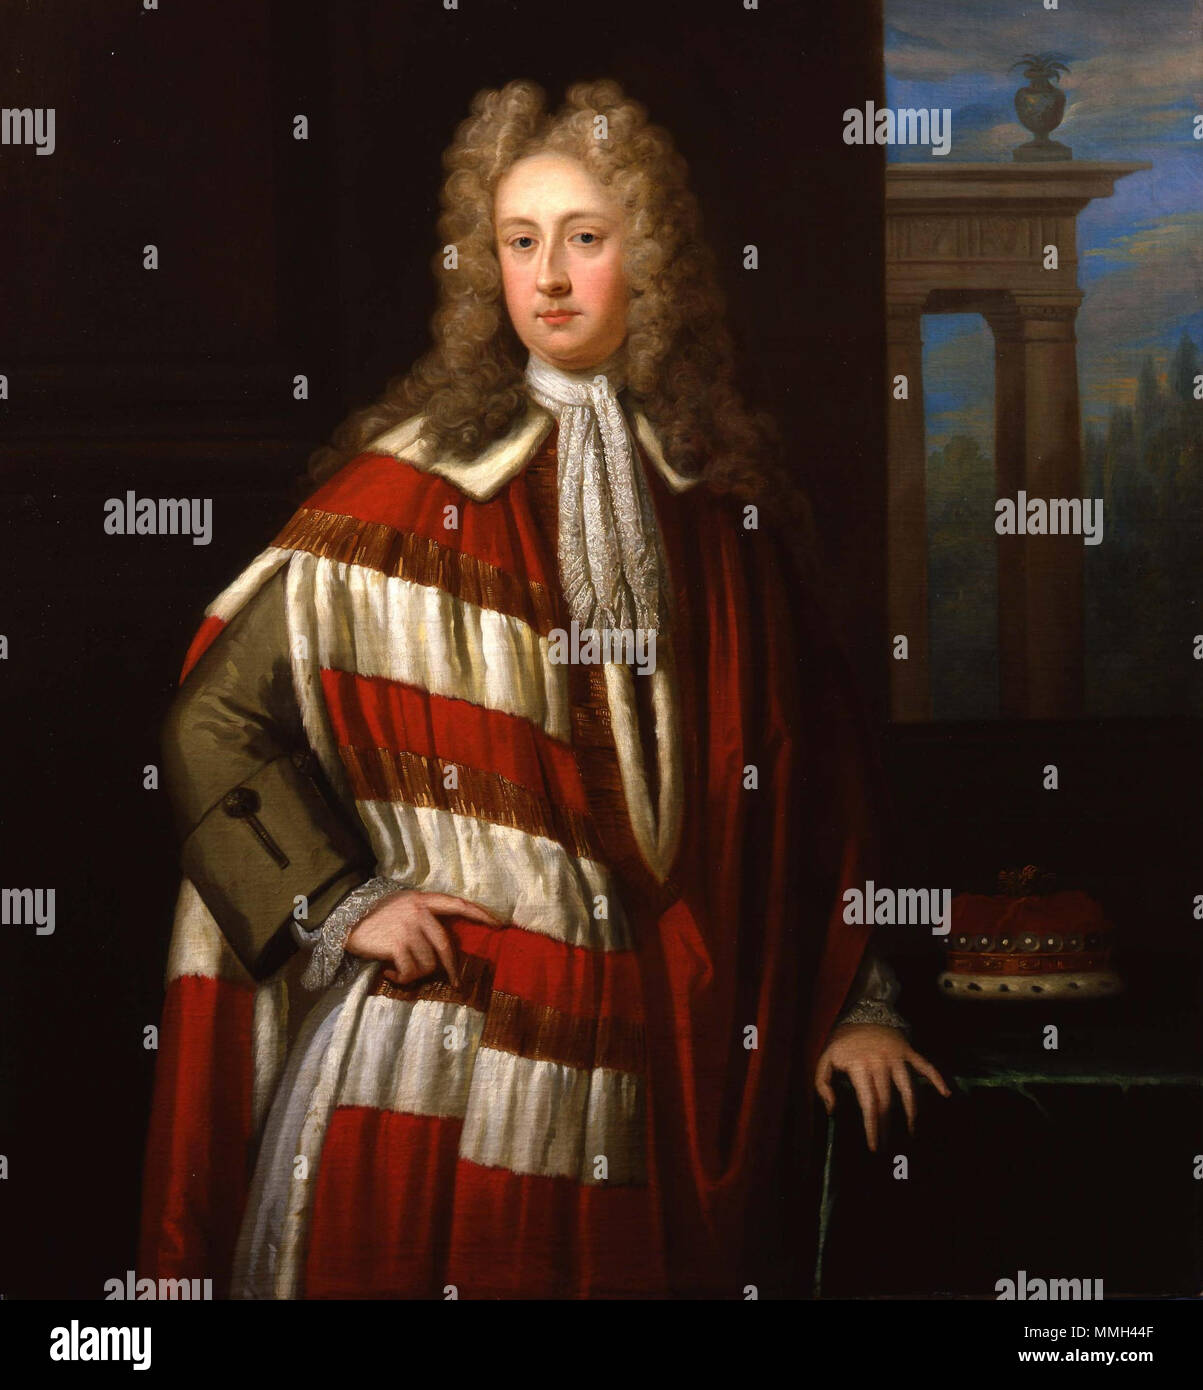 .  English: This portrait of the famous Tory and later Jacobite politician shows him in Parliamentary robes. Bolingbroke could not accommodate himself to the Hanoverian succession and went into exile abroad at the Jacobite court.  Portrait of Henry St John, 1st Viscount Bolingbroke (1678-1751). 1678. Henry St John, 1st Viscount Bolingbroke (1678) Stock Photo